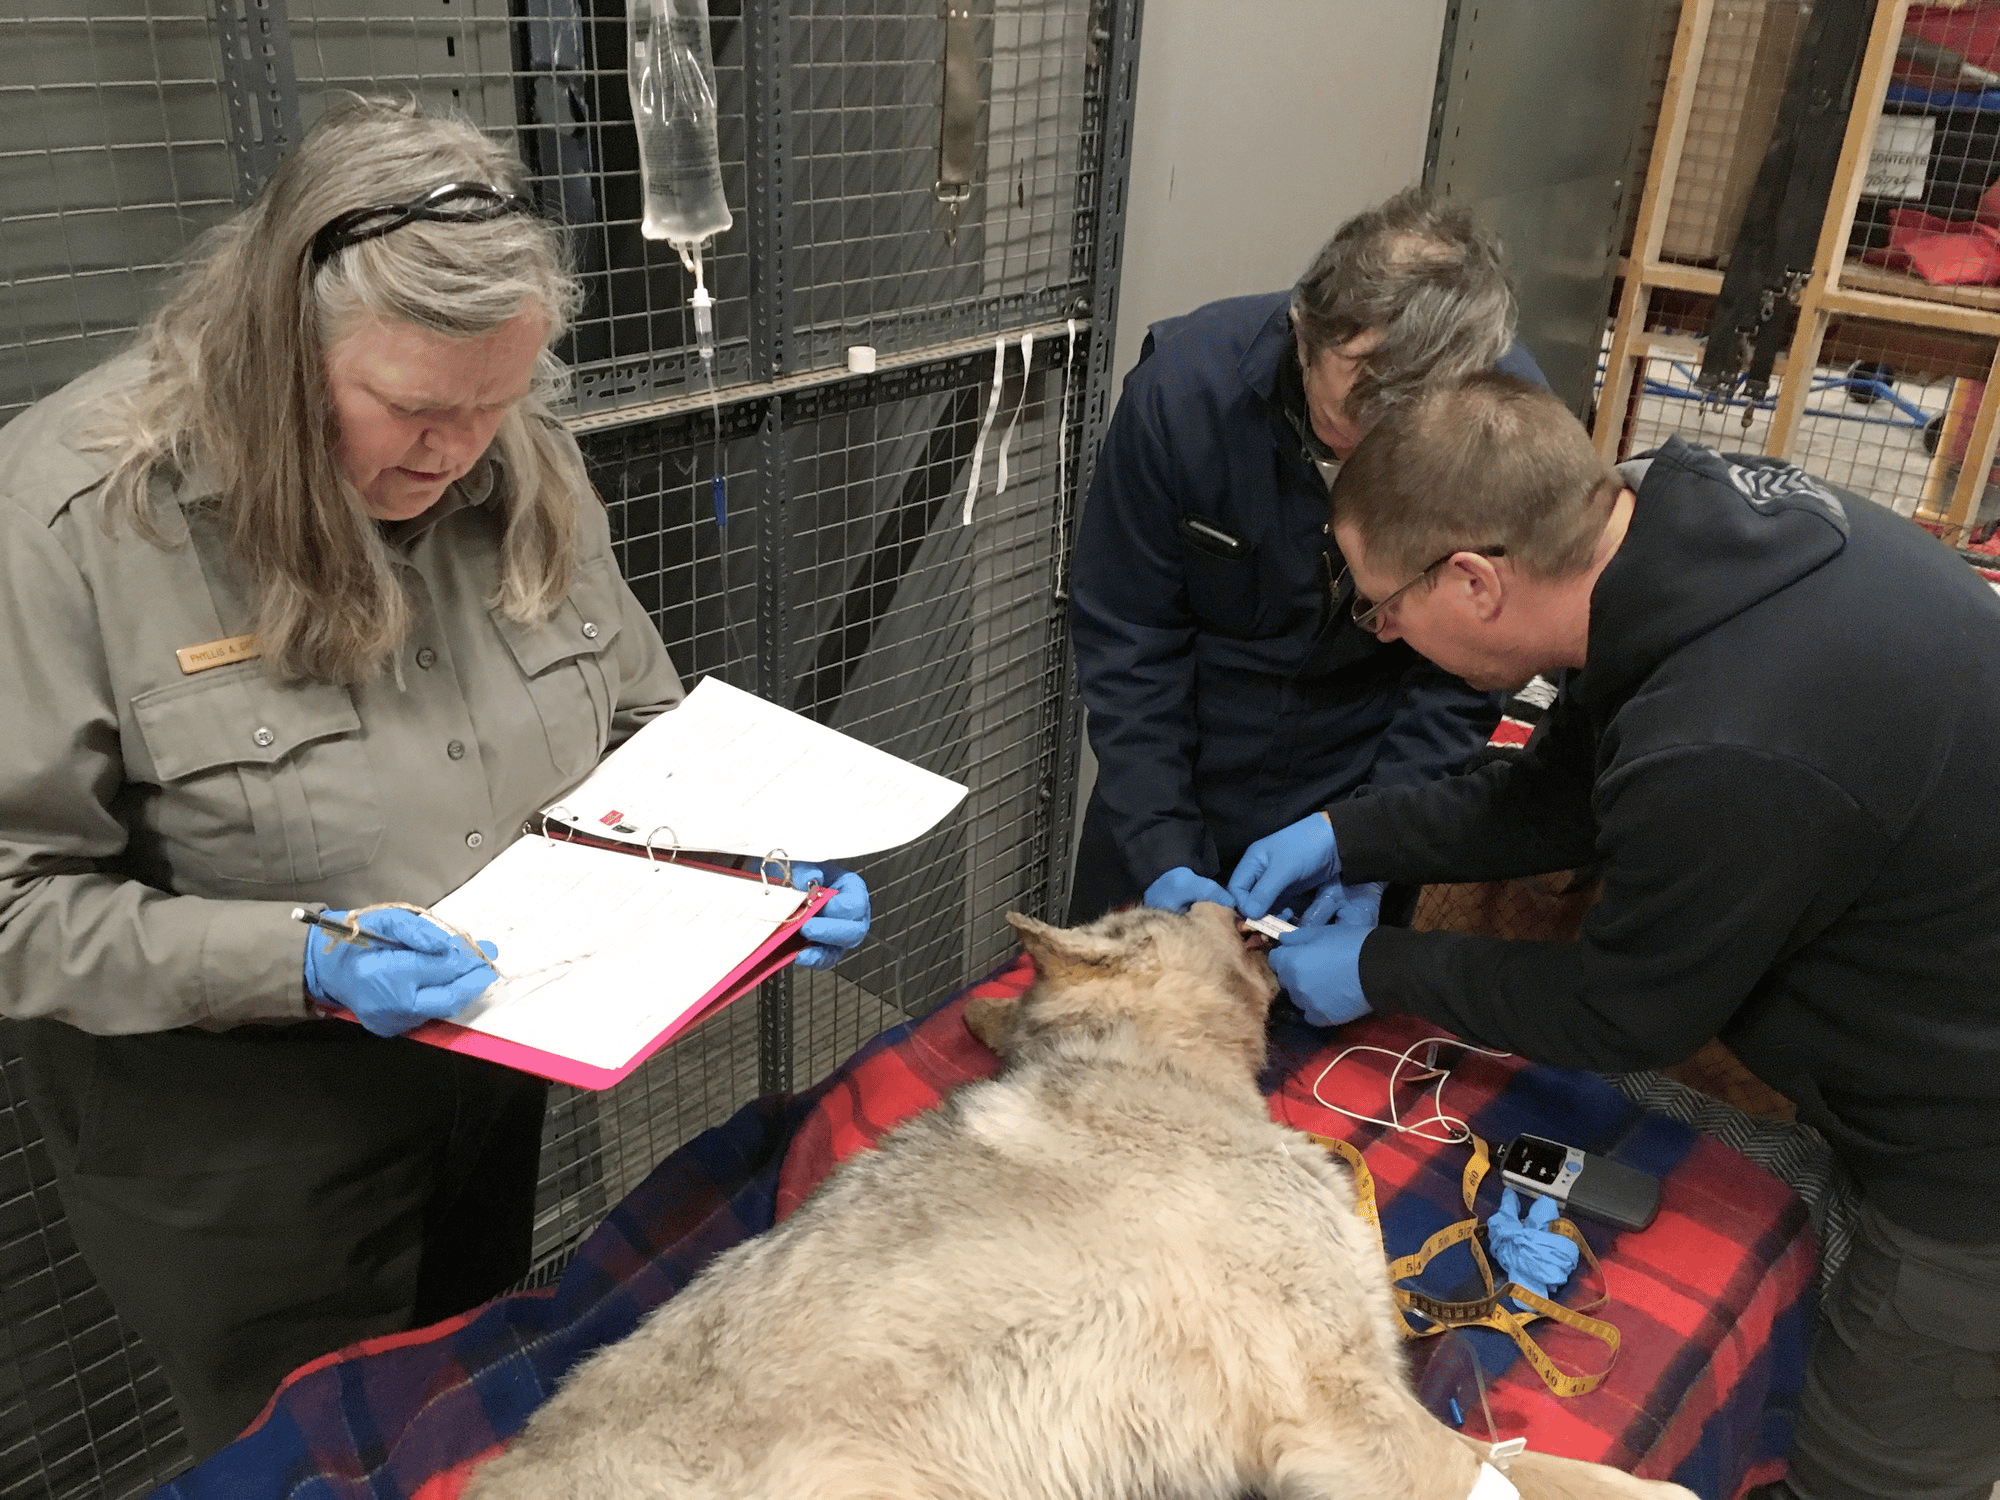 Female wolf having a tooth inspection by veterinarians. Former Isle Royale National Park Superintendent, Phyllis Greene